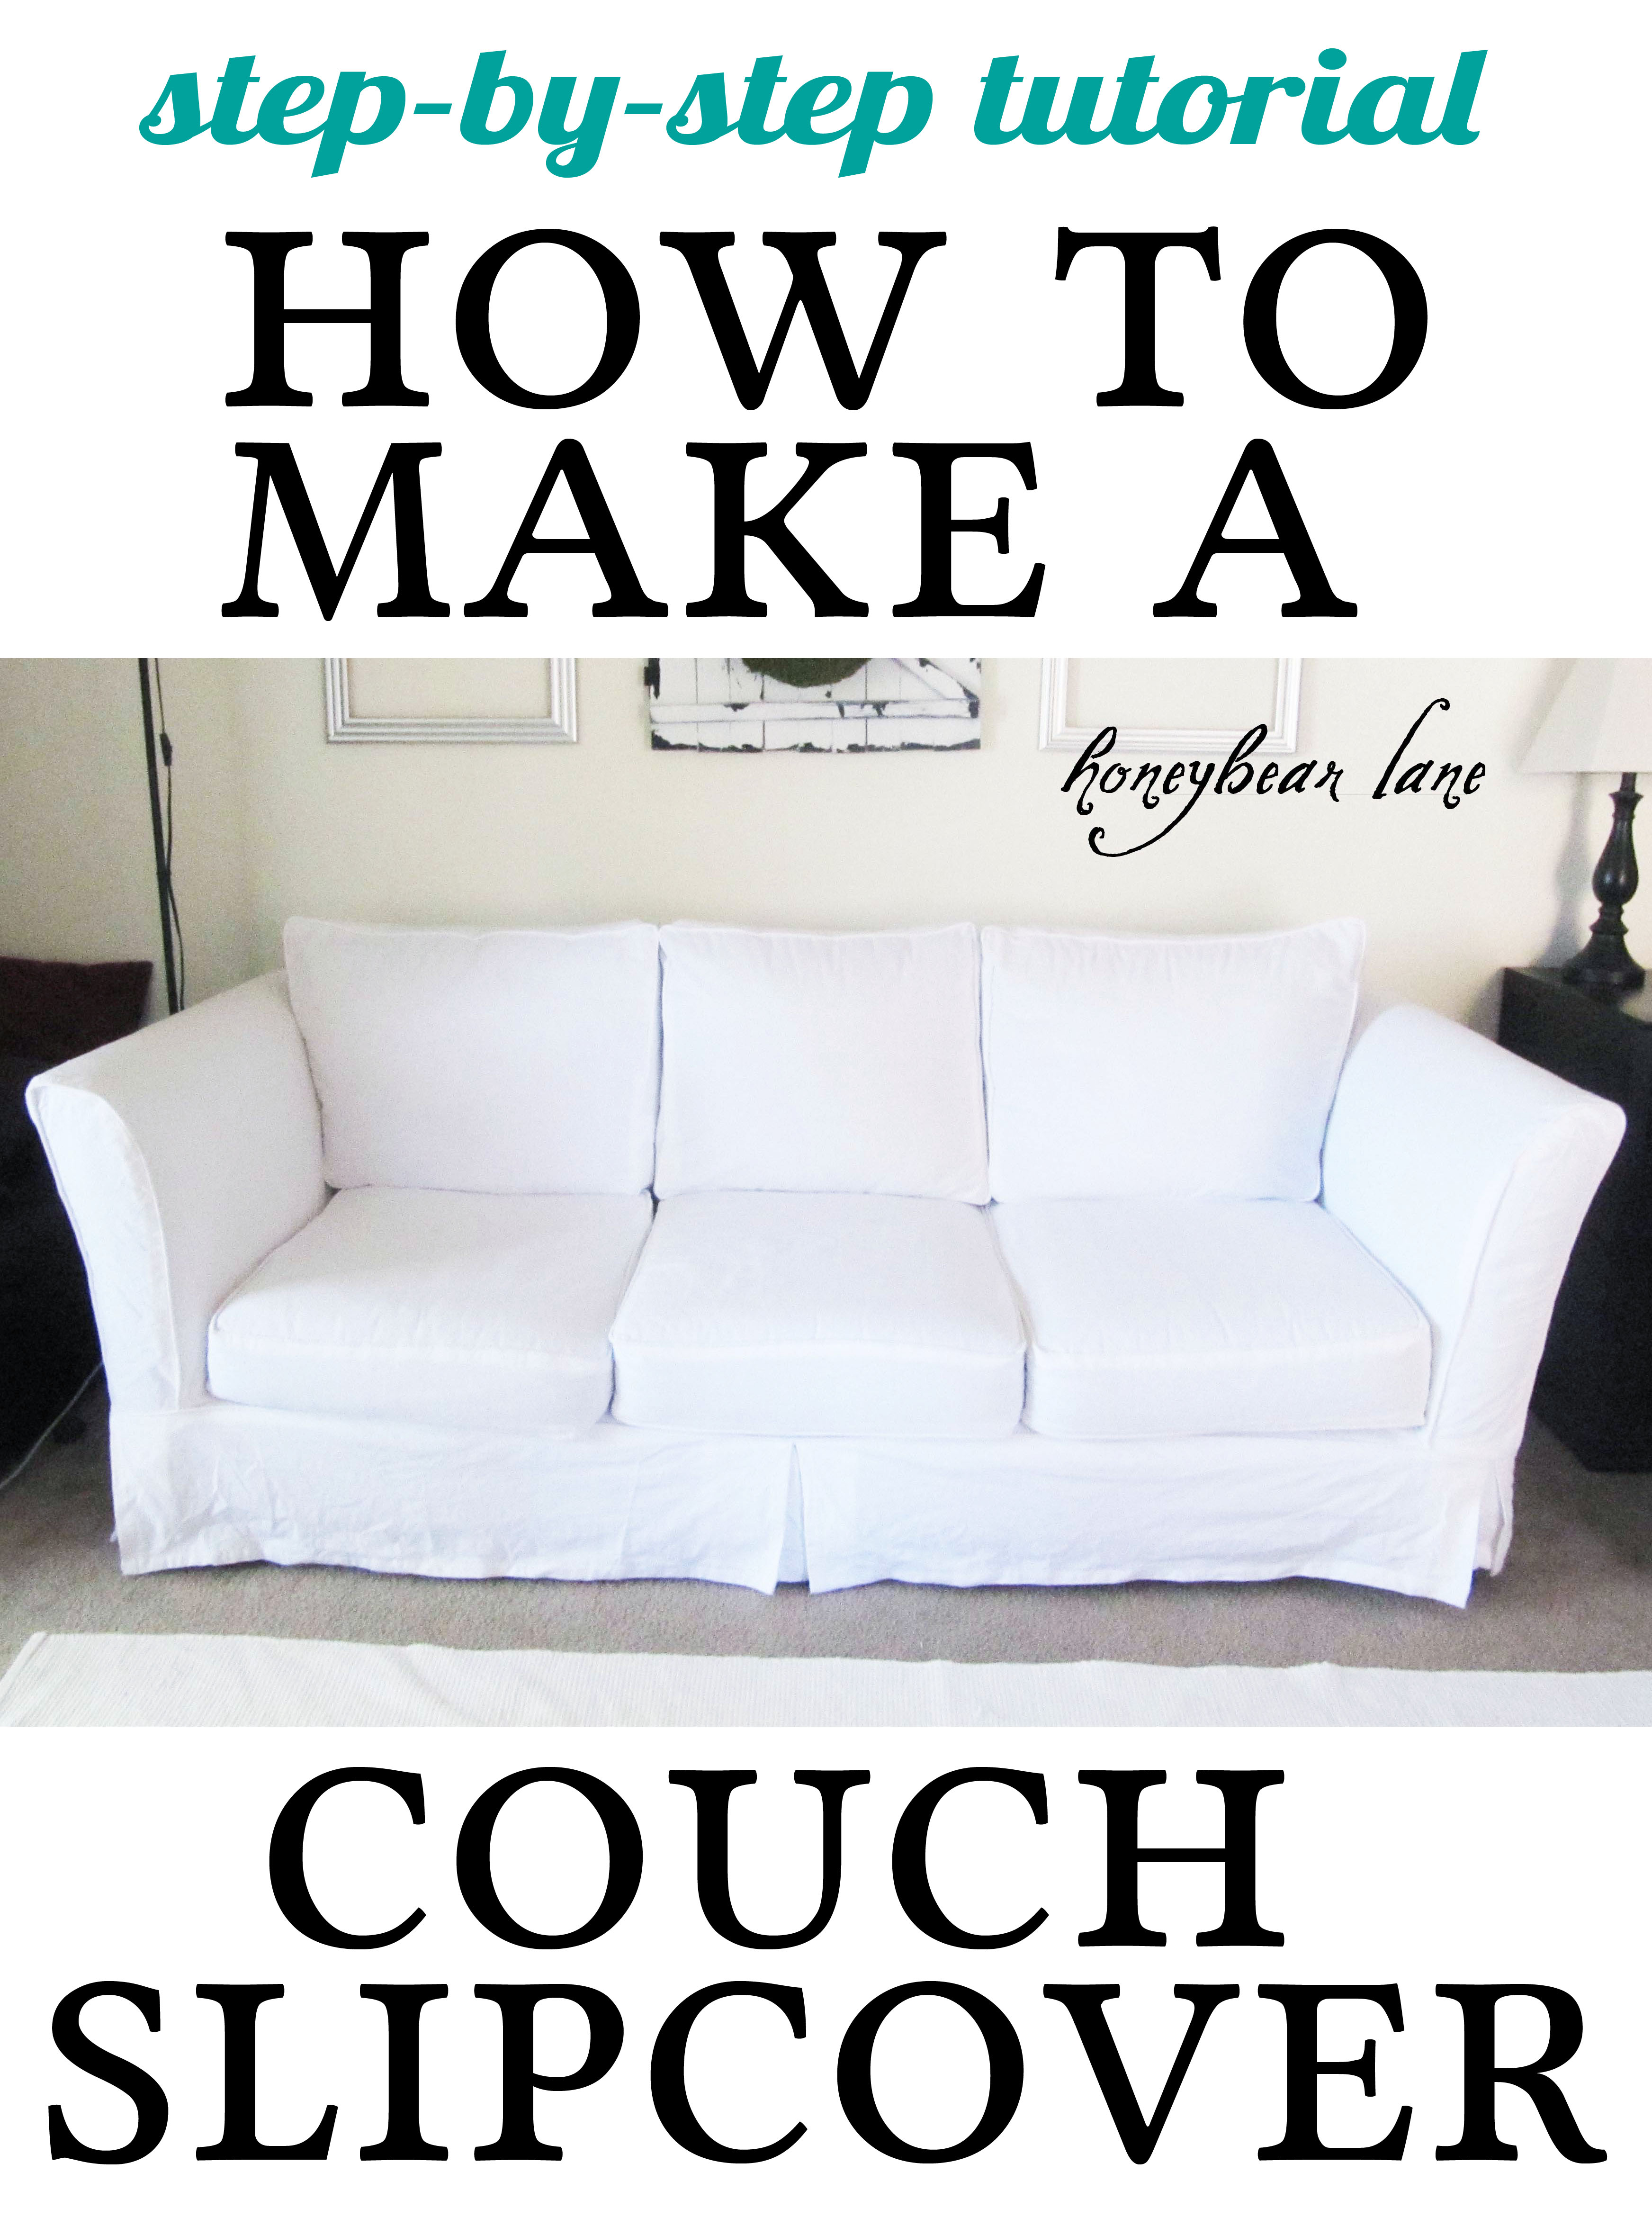 how-to-make-a-cushion-cover-and-other-slipcover-tutorials